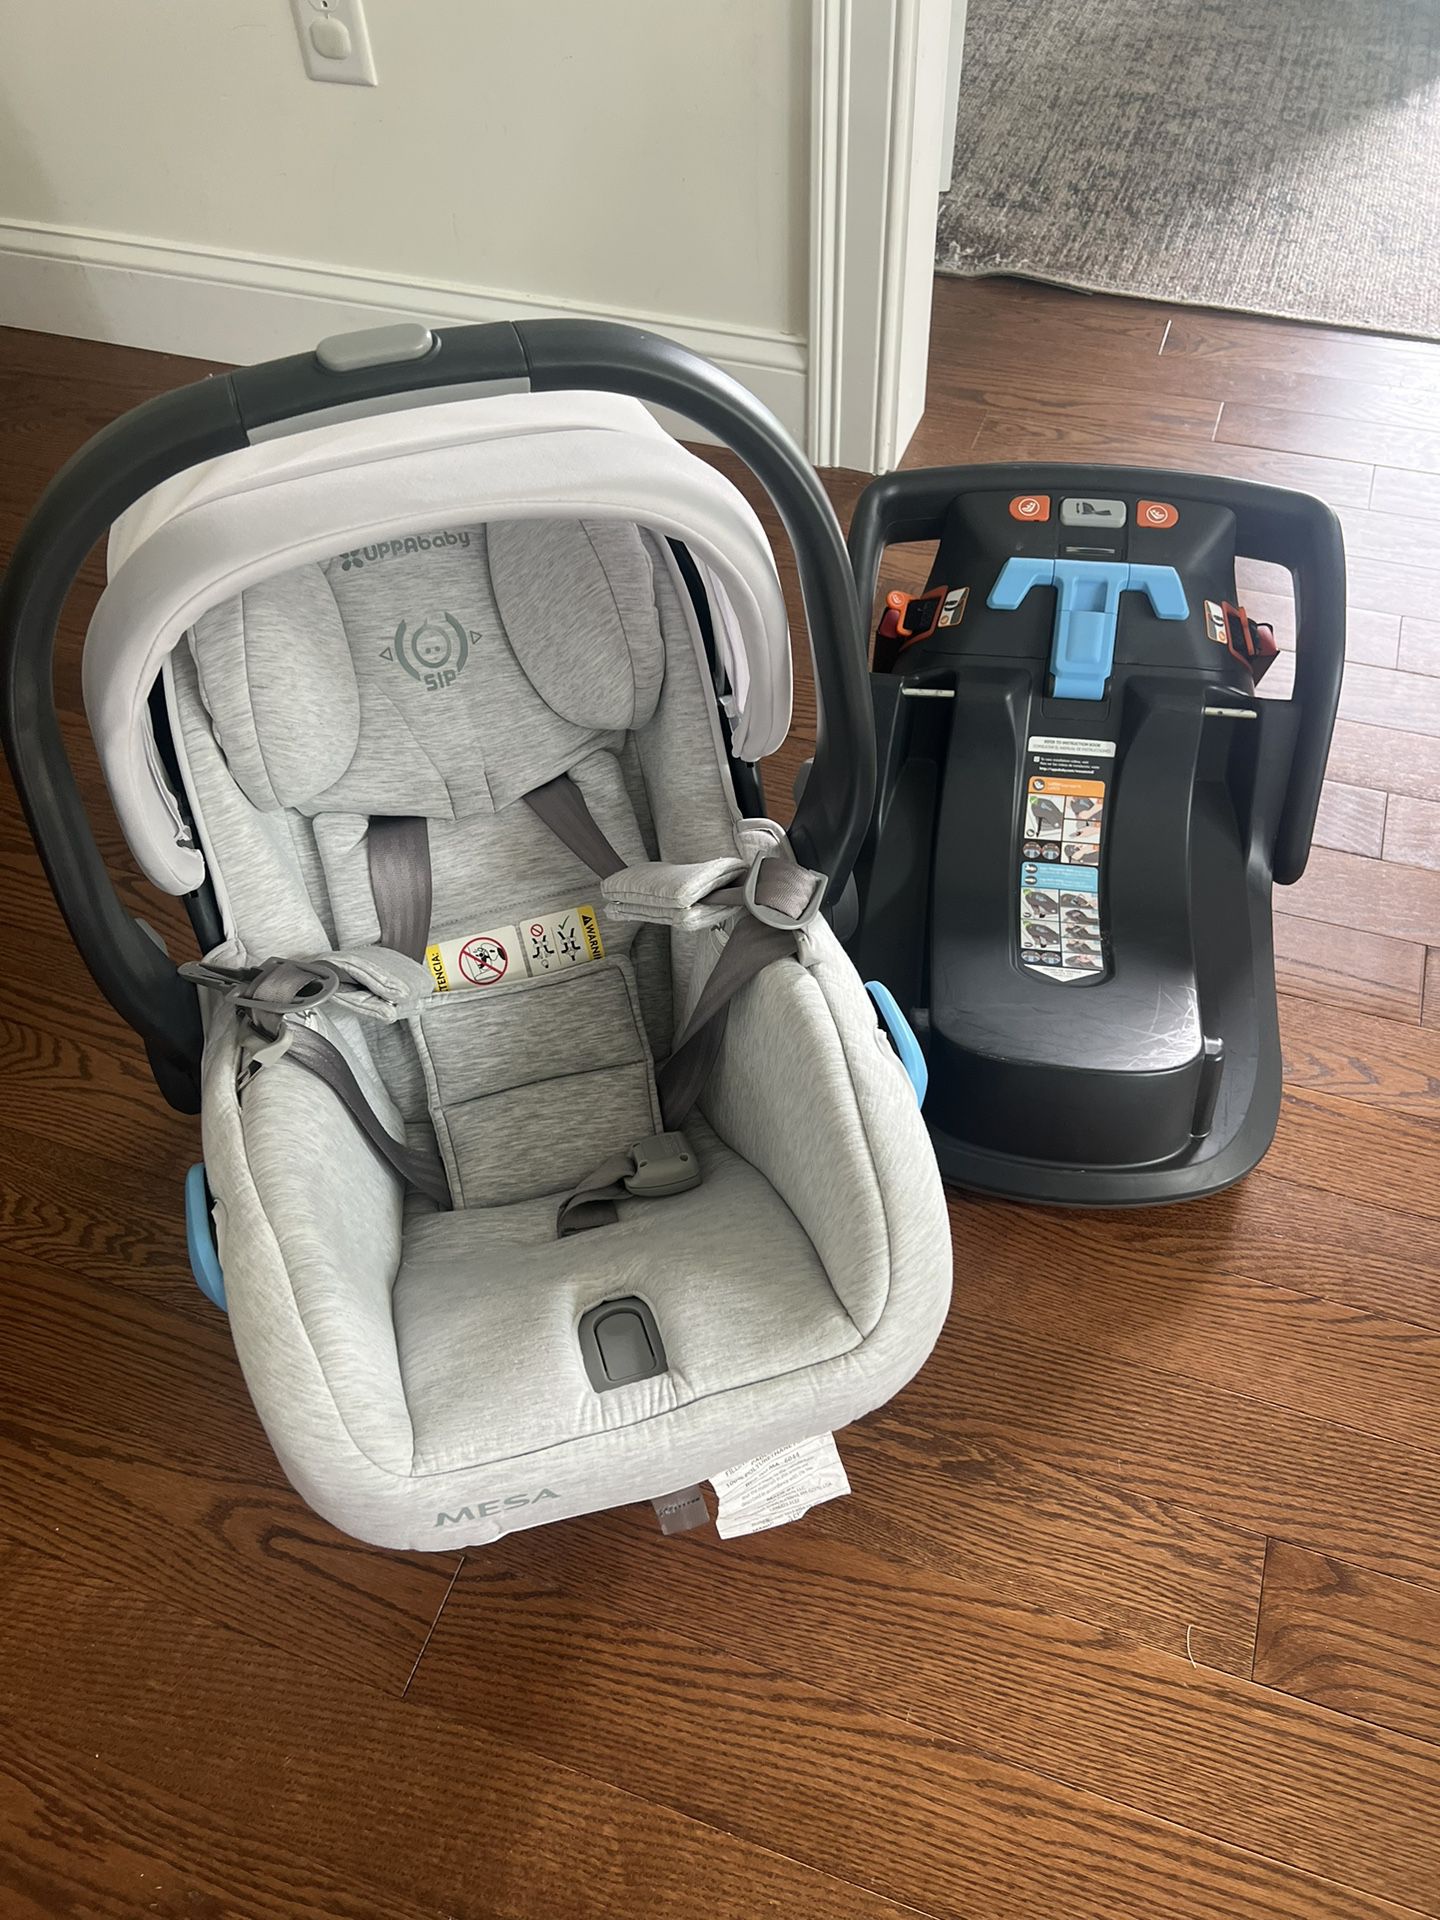 Uppababy Mesa Infant Car Seat - Color: Bryce